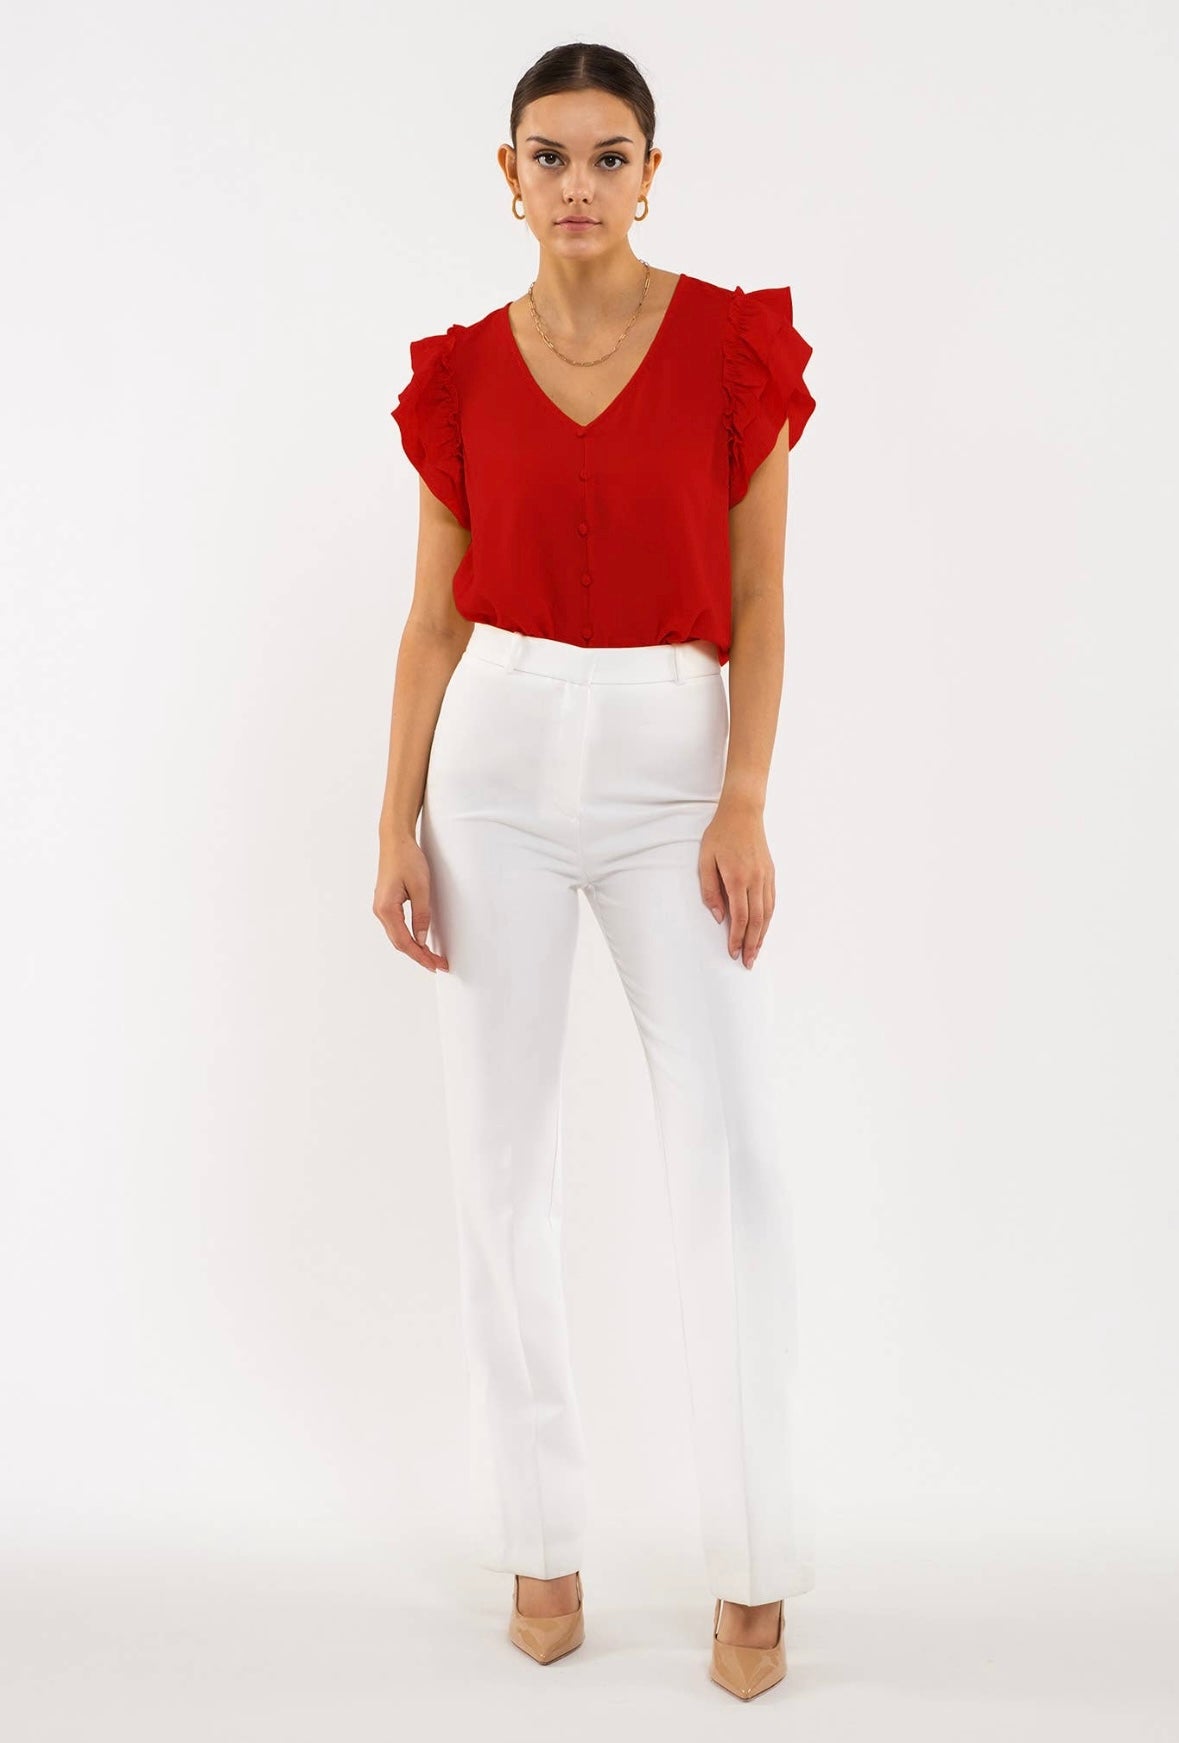 Whitley Top/Red